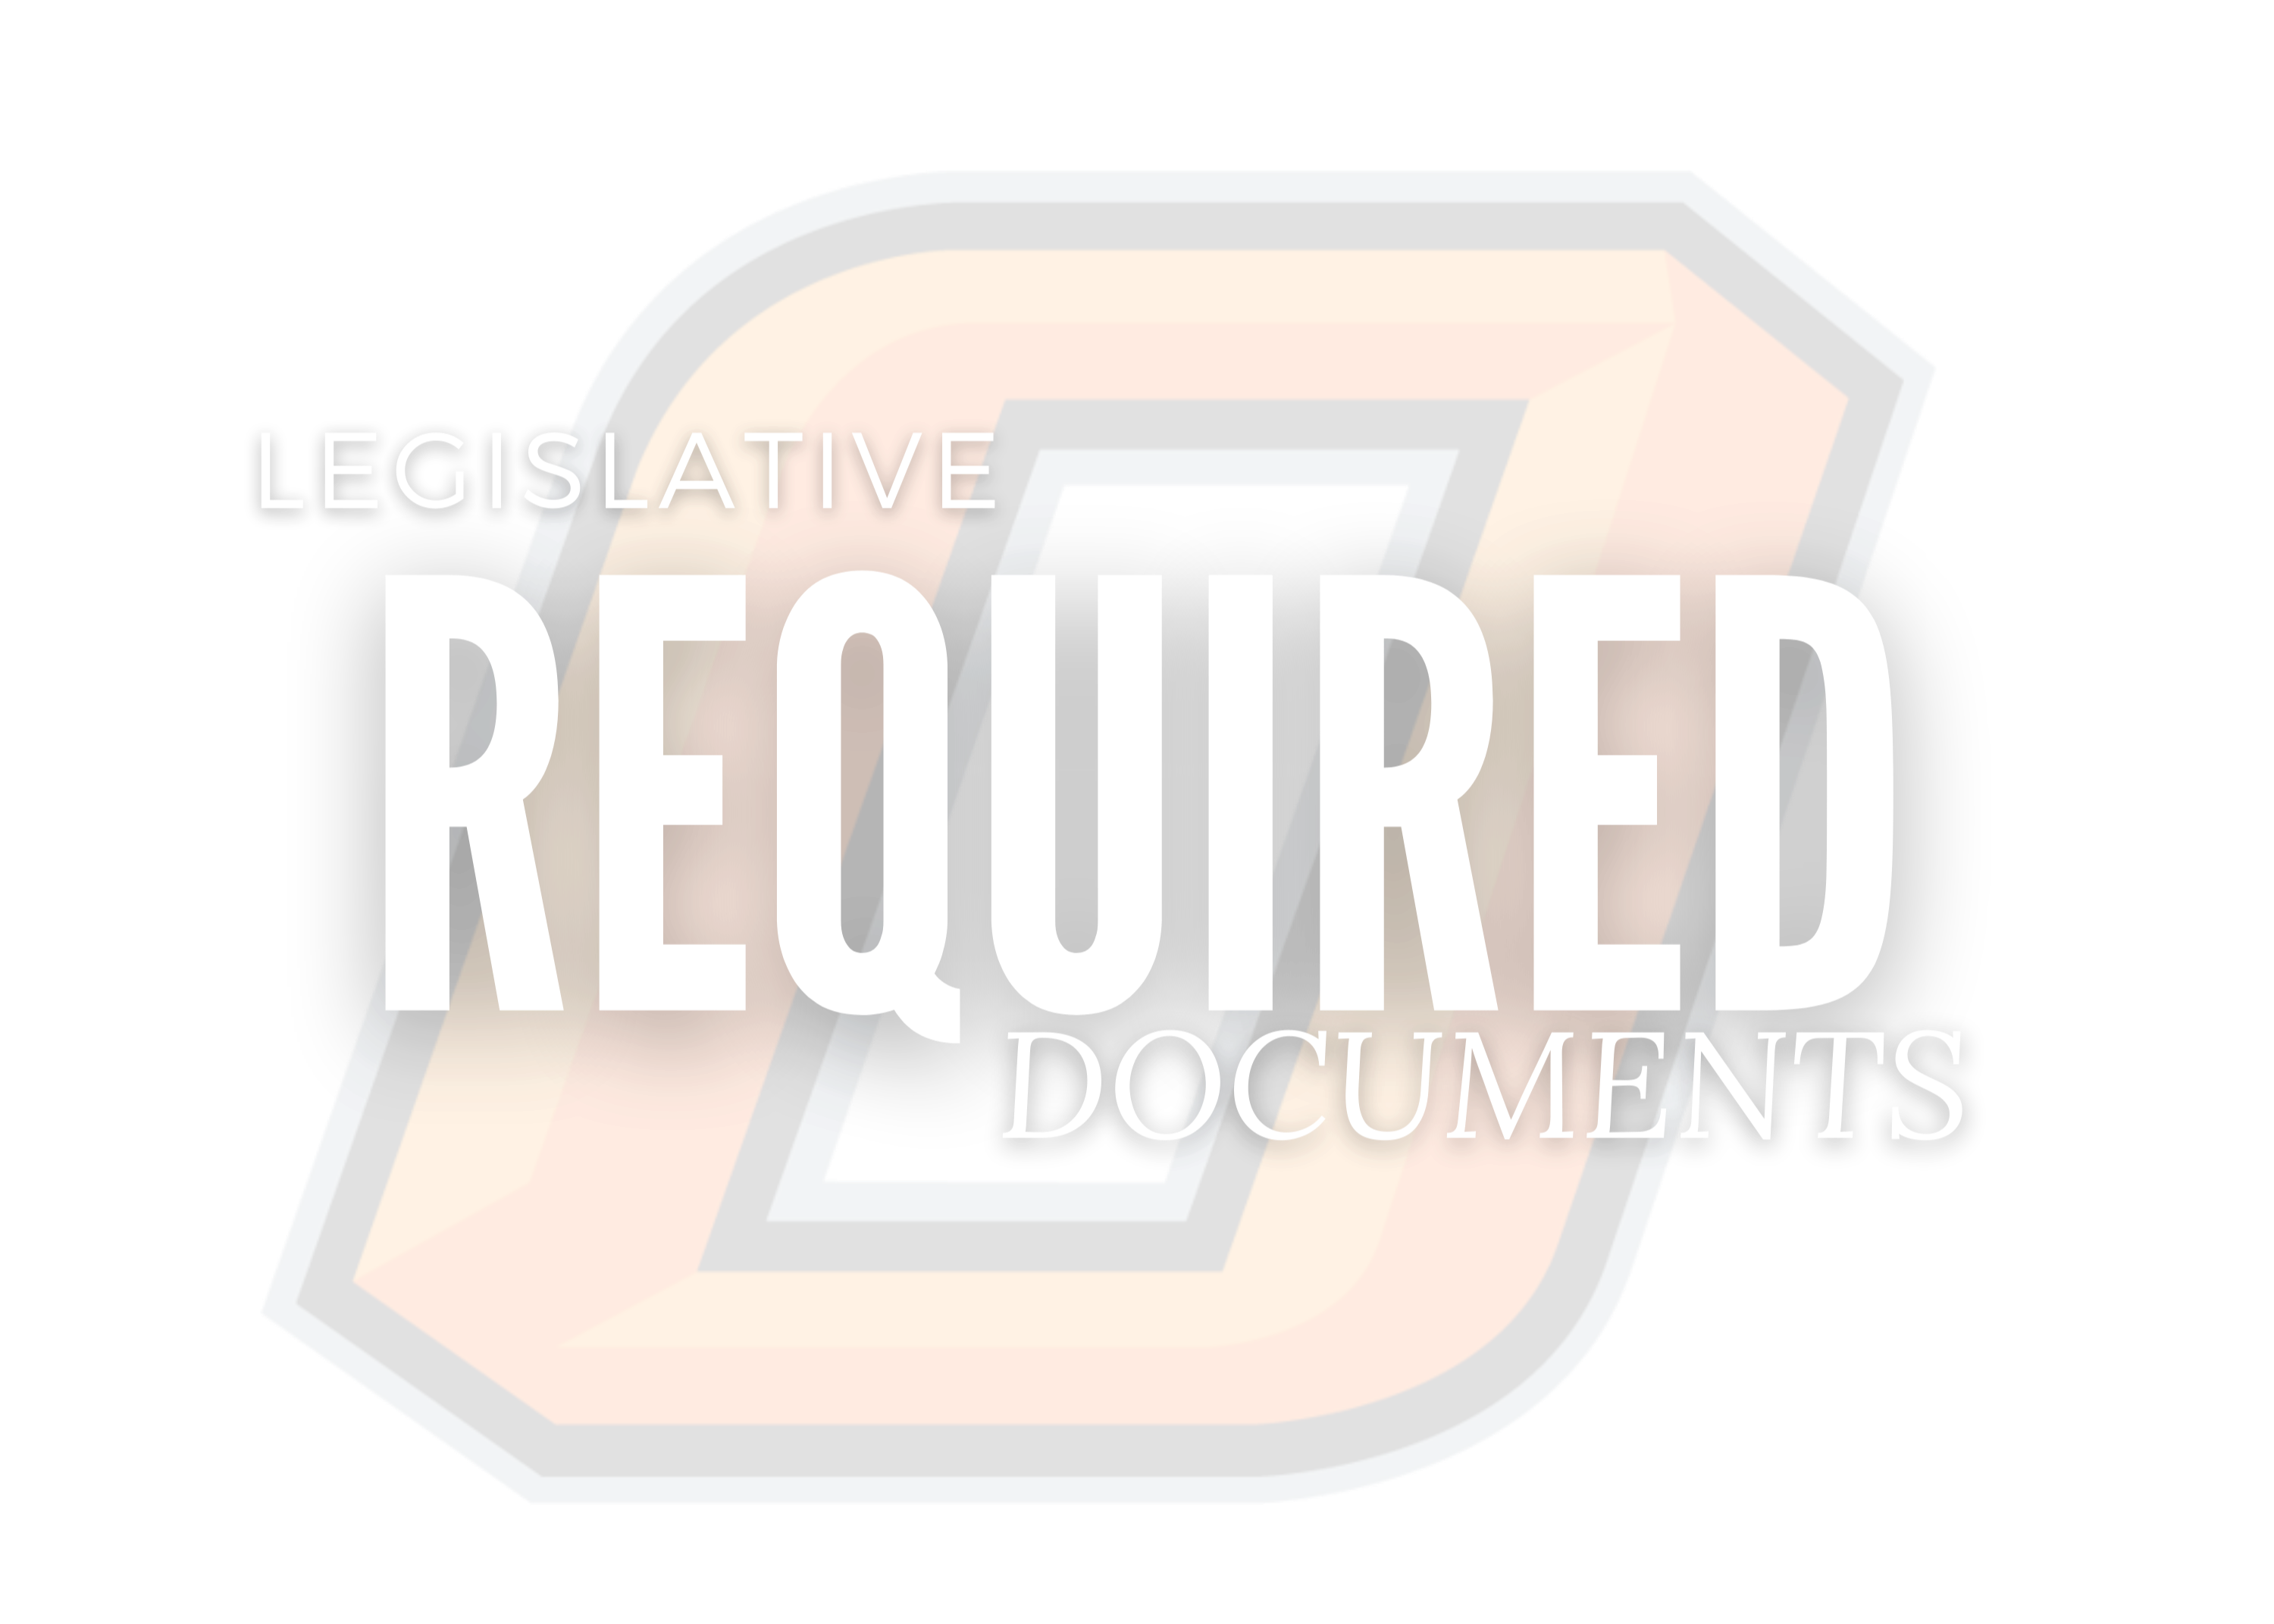 State Required Documents